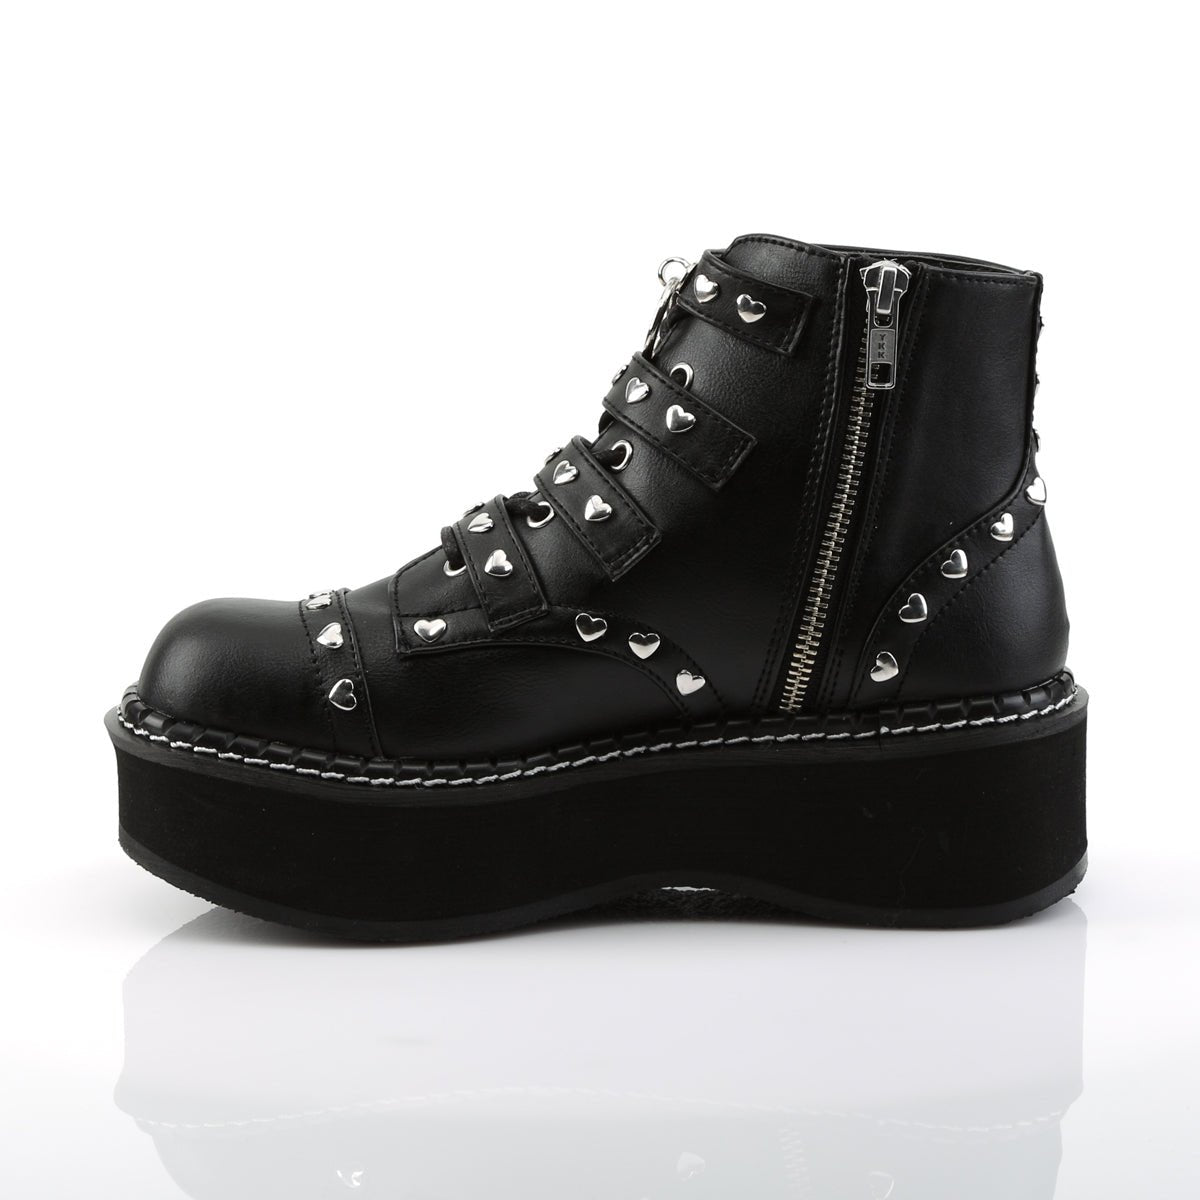 Too Fast | Demonia Emily 315 | Black Vegan Leather Women&#39;s Ankle Boots